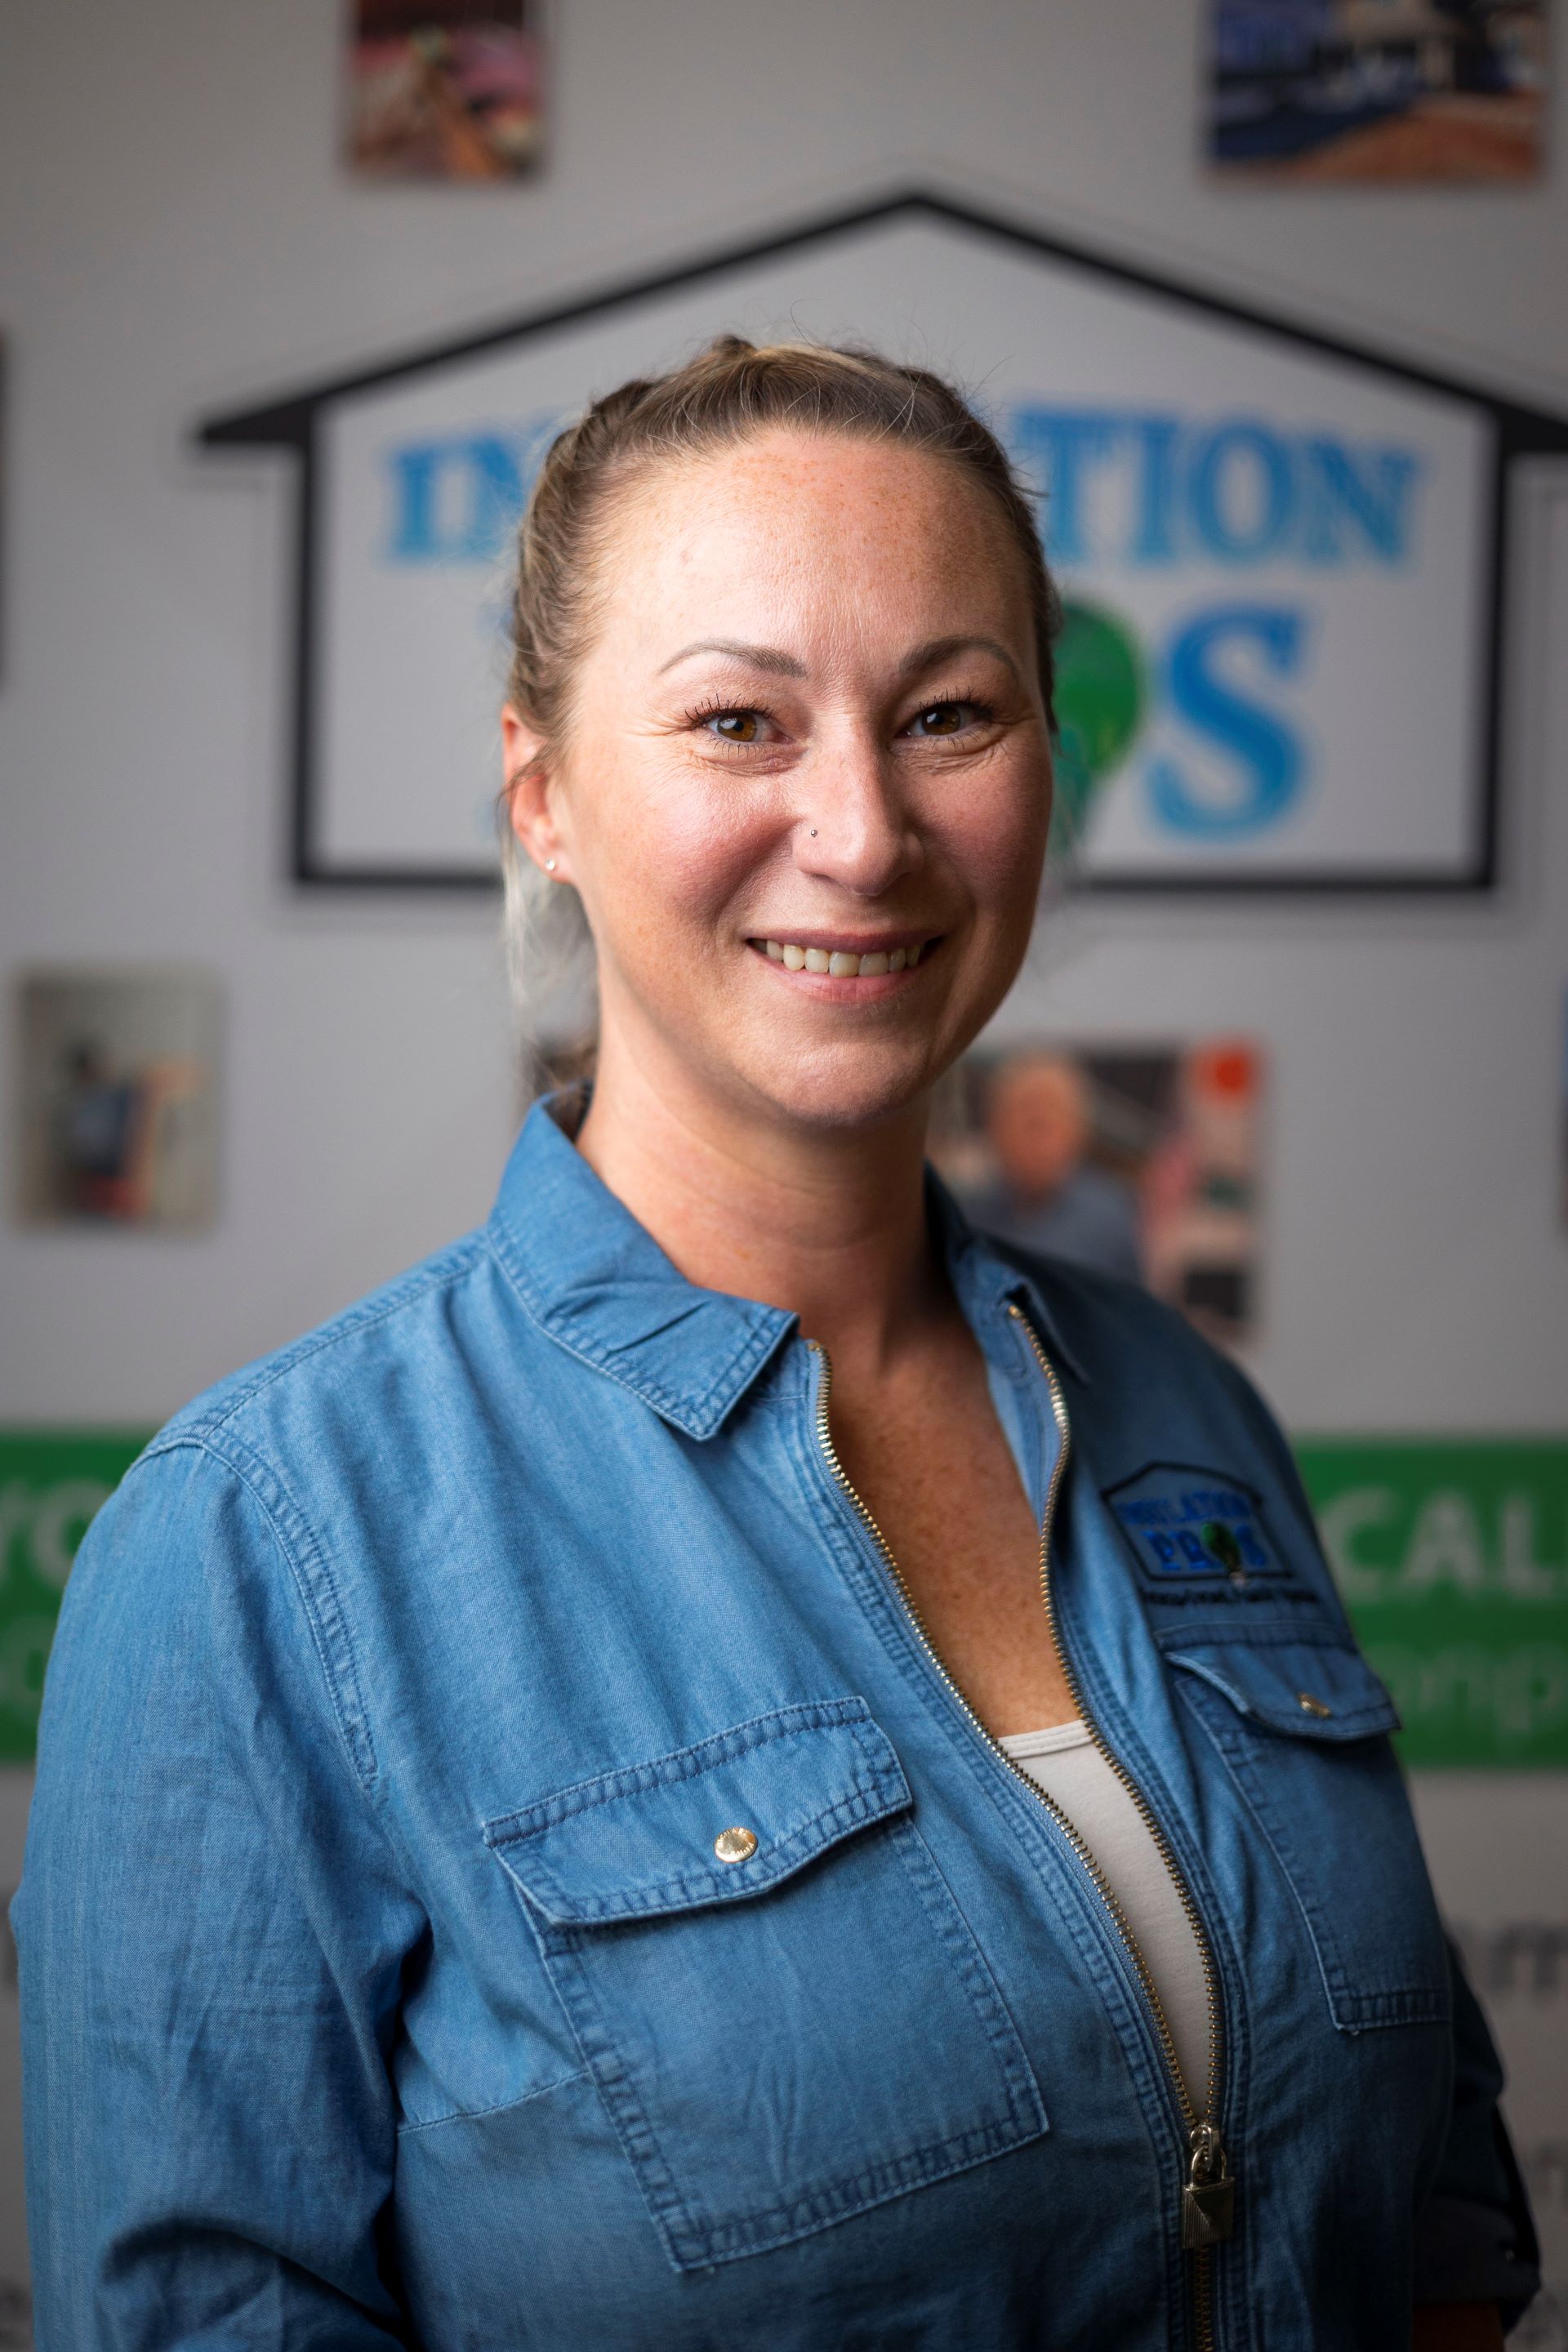 A woman in a blue denim shirt is smiling for the camera.